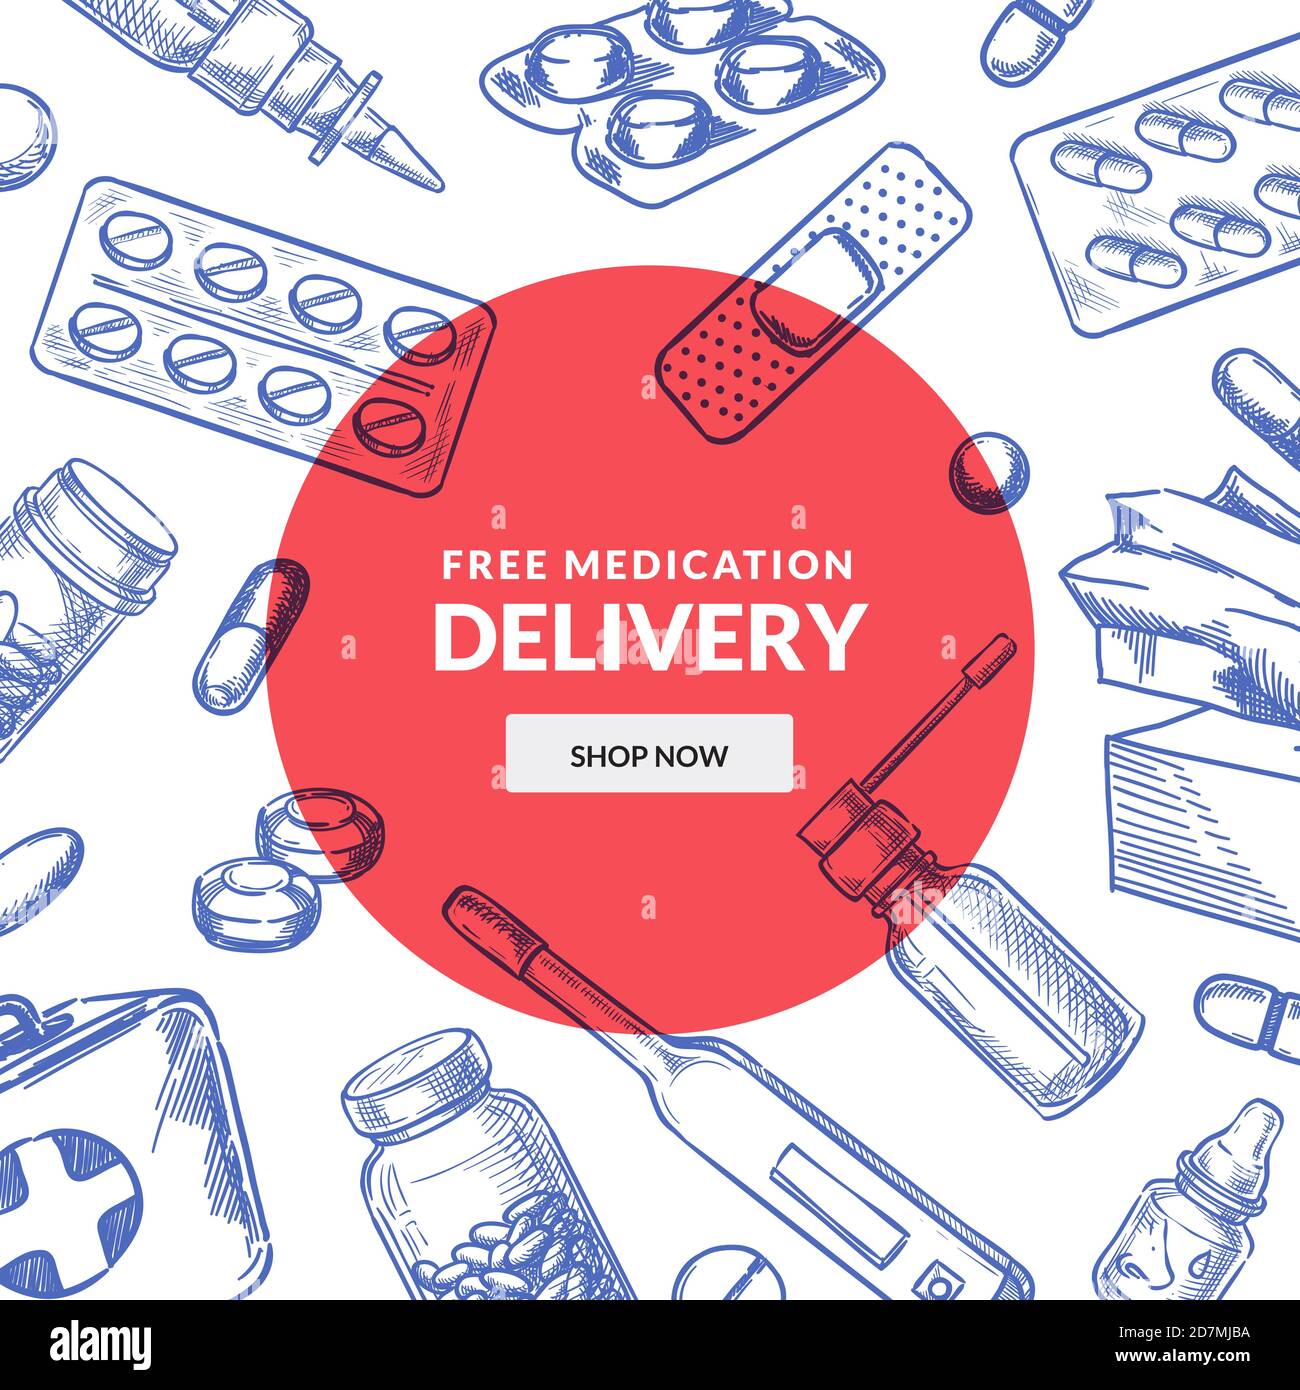 Medicine and pharmacy abstract background. Drugstore poster or banner design template with pills, drugs, medical bottles. Vector hand drawn sketch ill Stock Vector